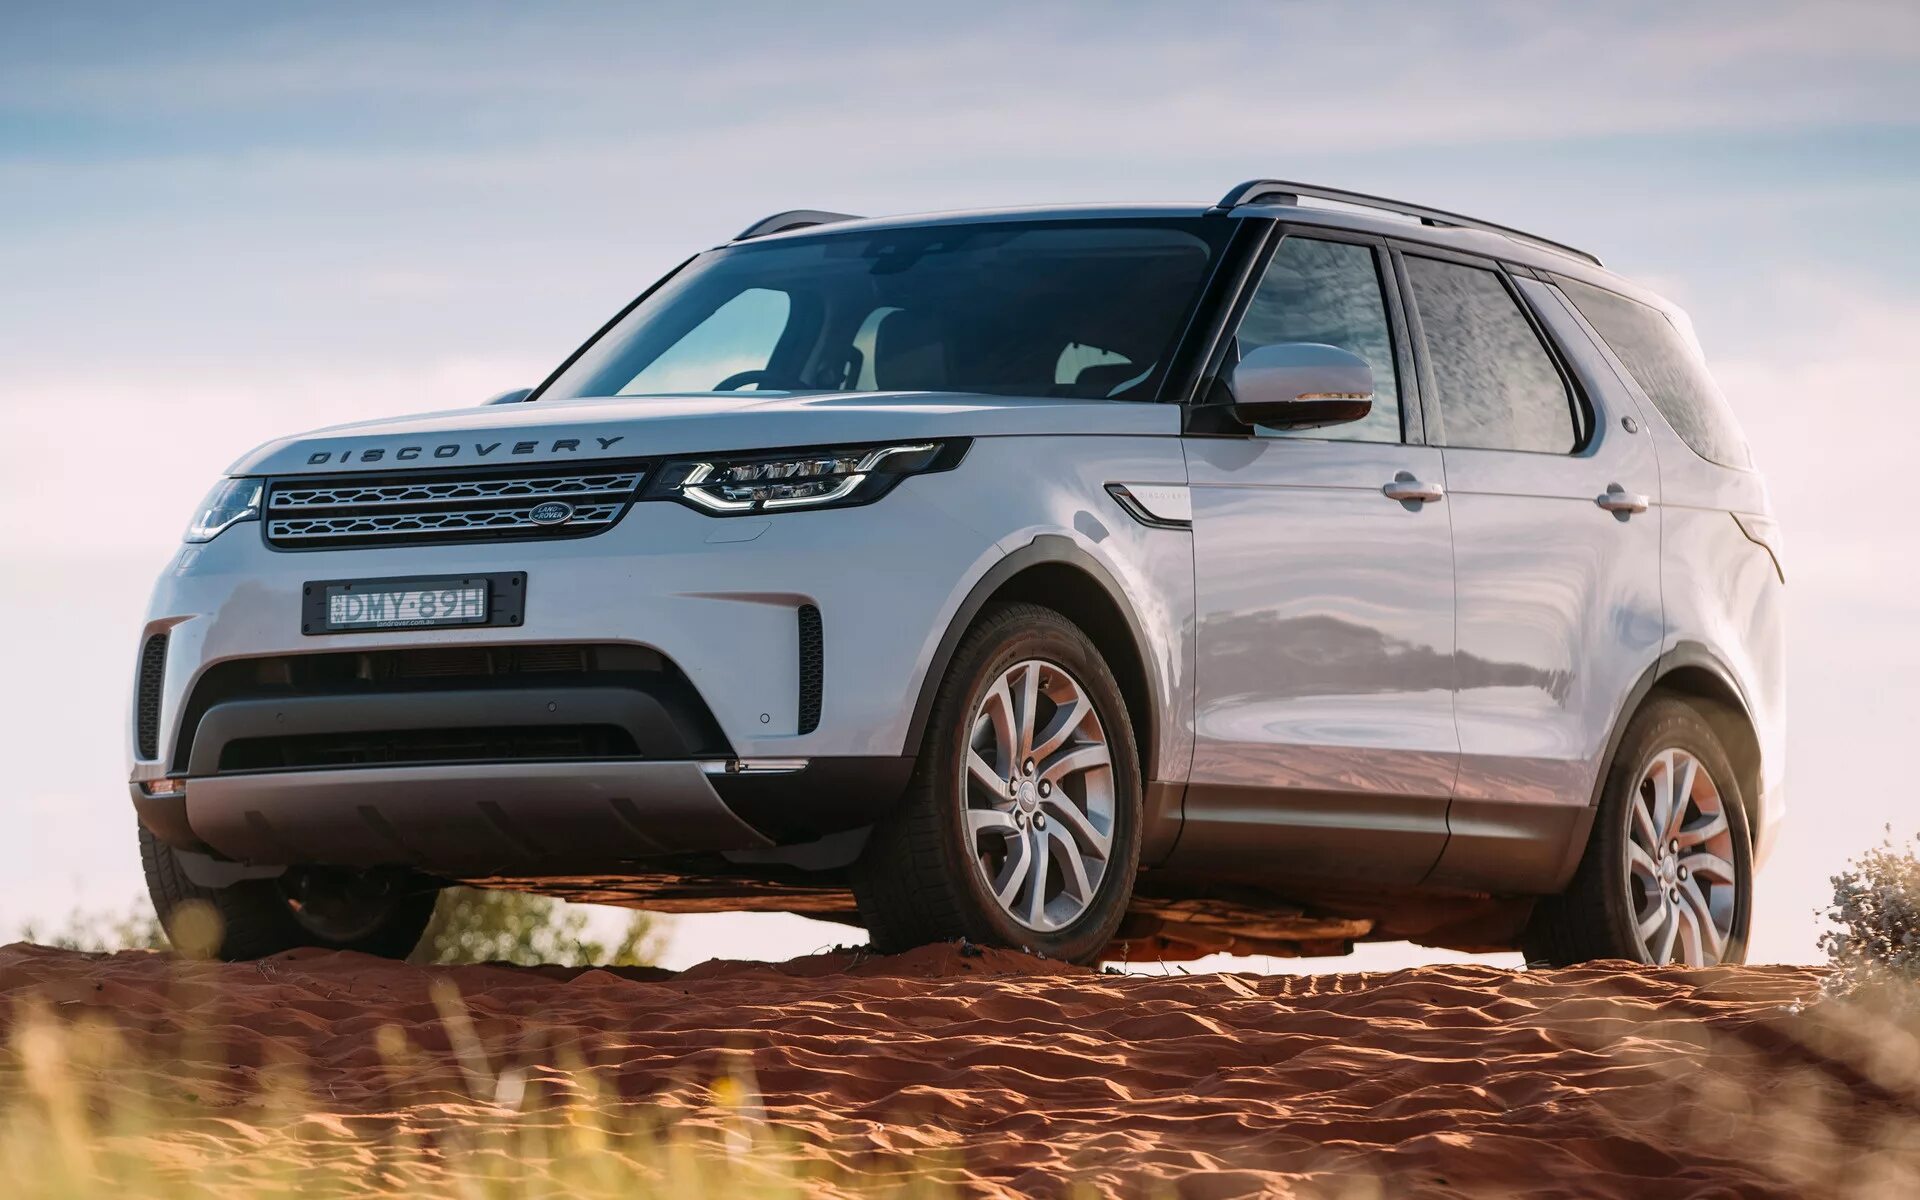 Дискавери выпуски. Land Rover Discovery 2022. Ленд Ровер Discovery 2017. Ленд Ровер Дискавери 4 2017. Ленд Ровер Дискавери 2021.